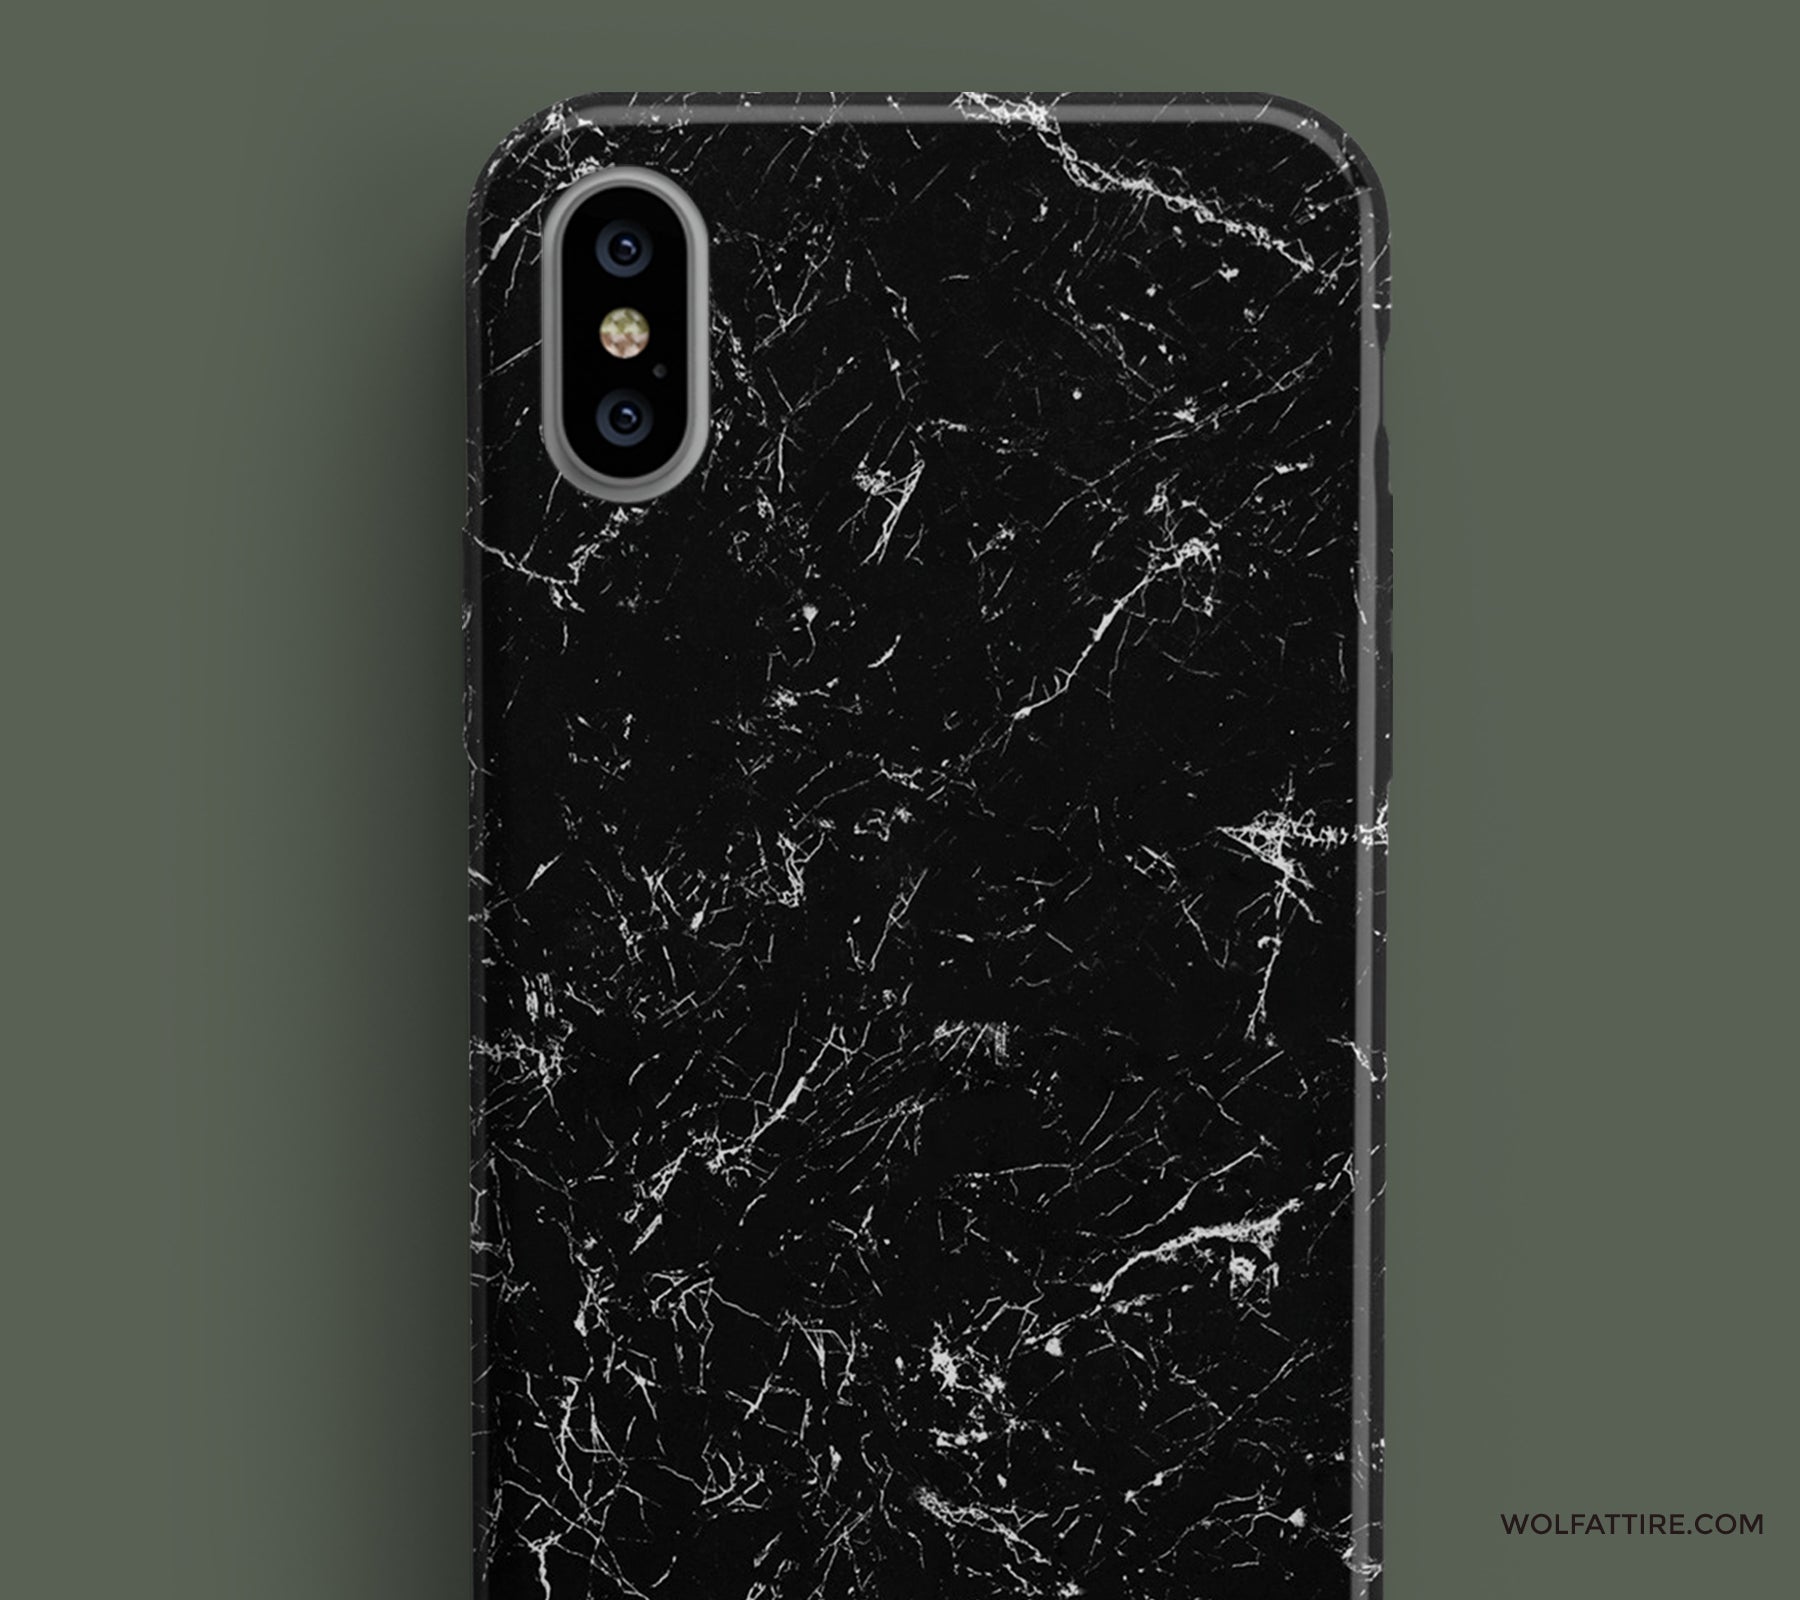 Black Marble iphone x covers and cases | shop online - wolfattire